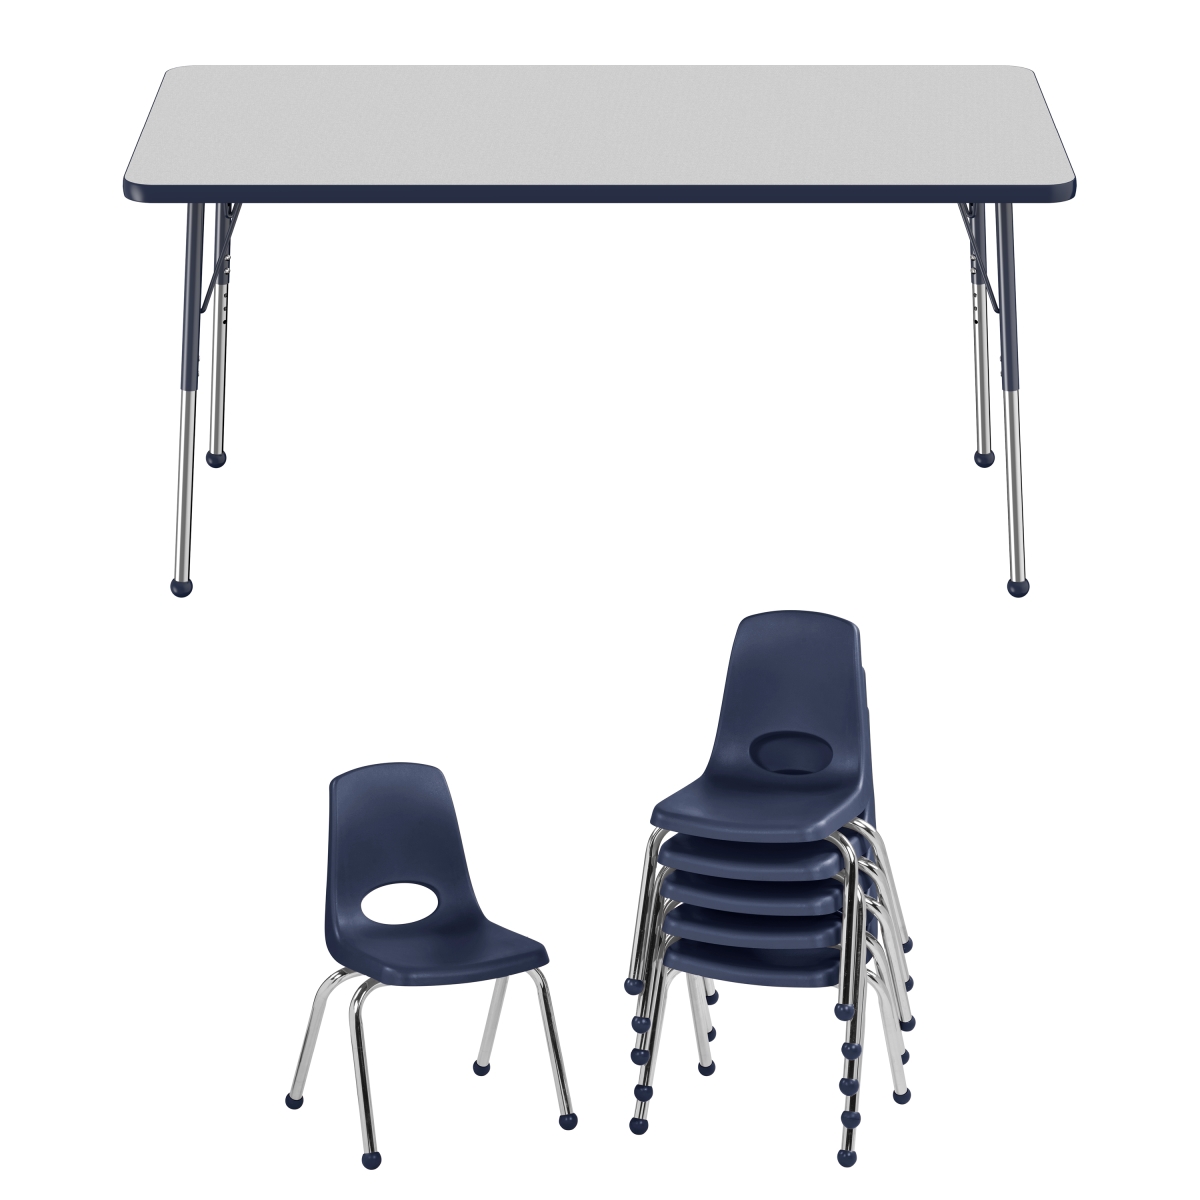 10300-gynv 30 X 60 In. Rectangle T-mold Adjustable Activity Table Standard Ball With 6 Stack Chairs 14 In. Ball Glide - Grey & Navy